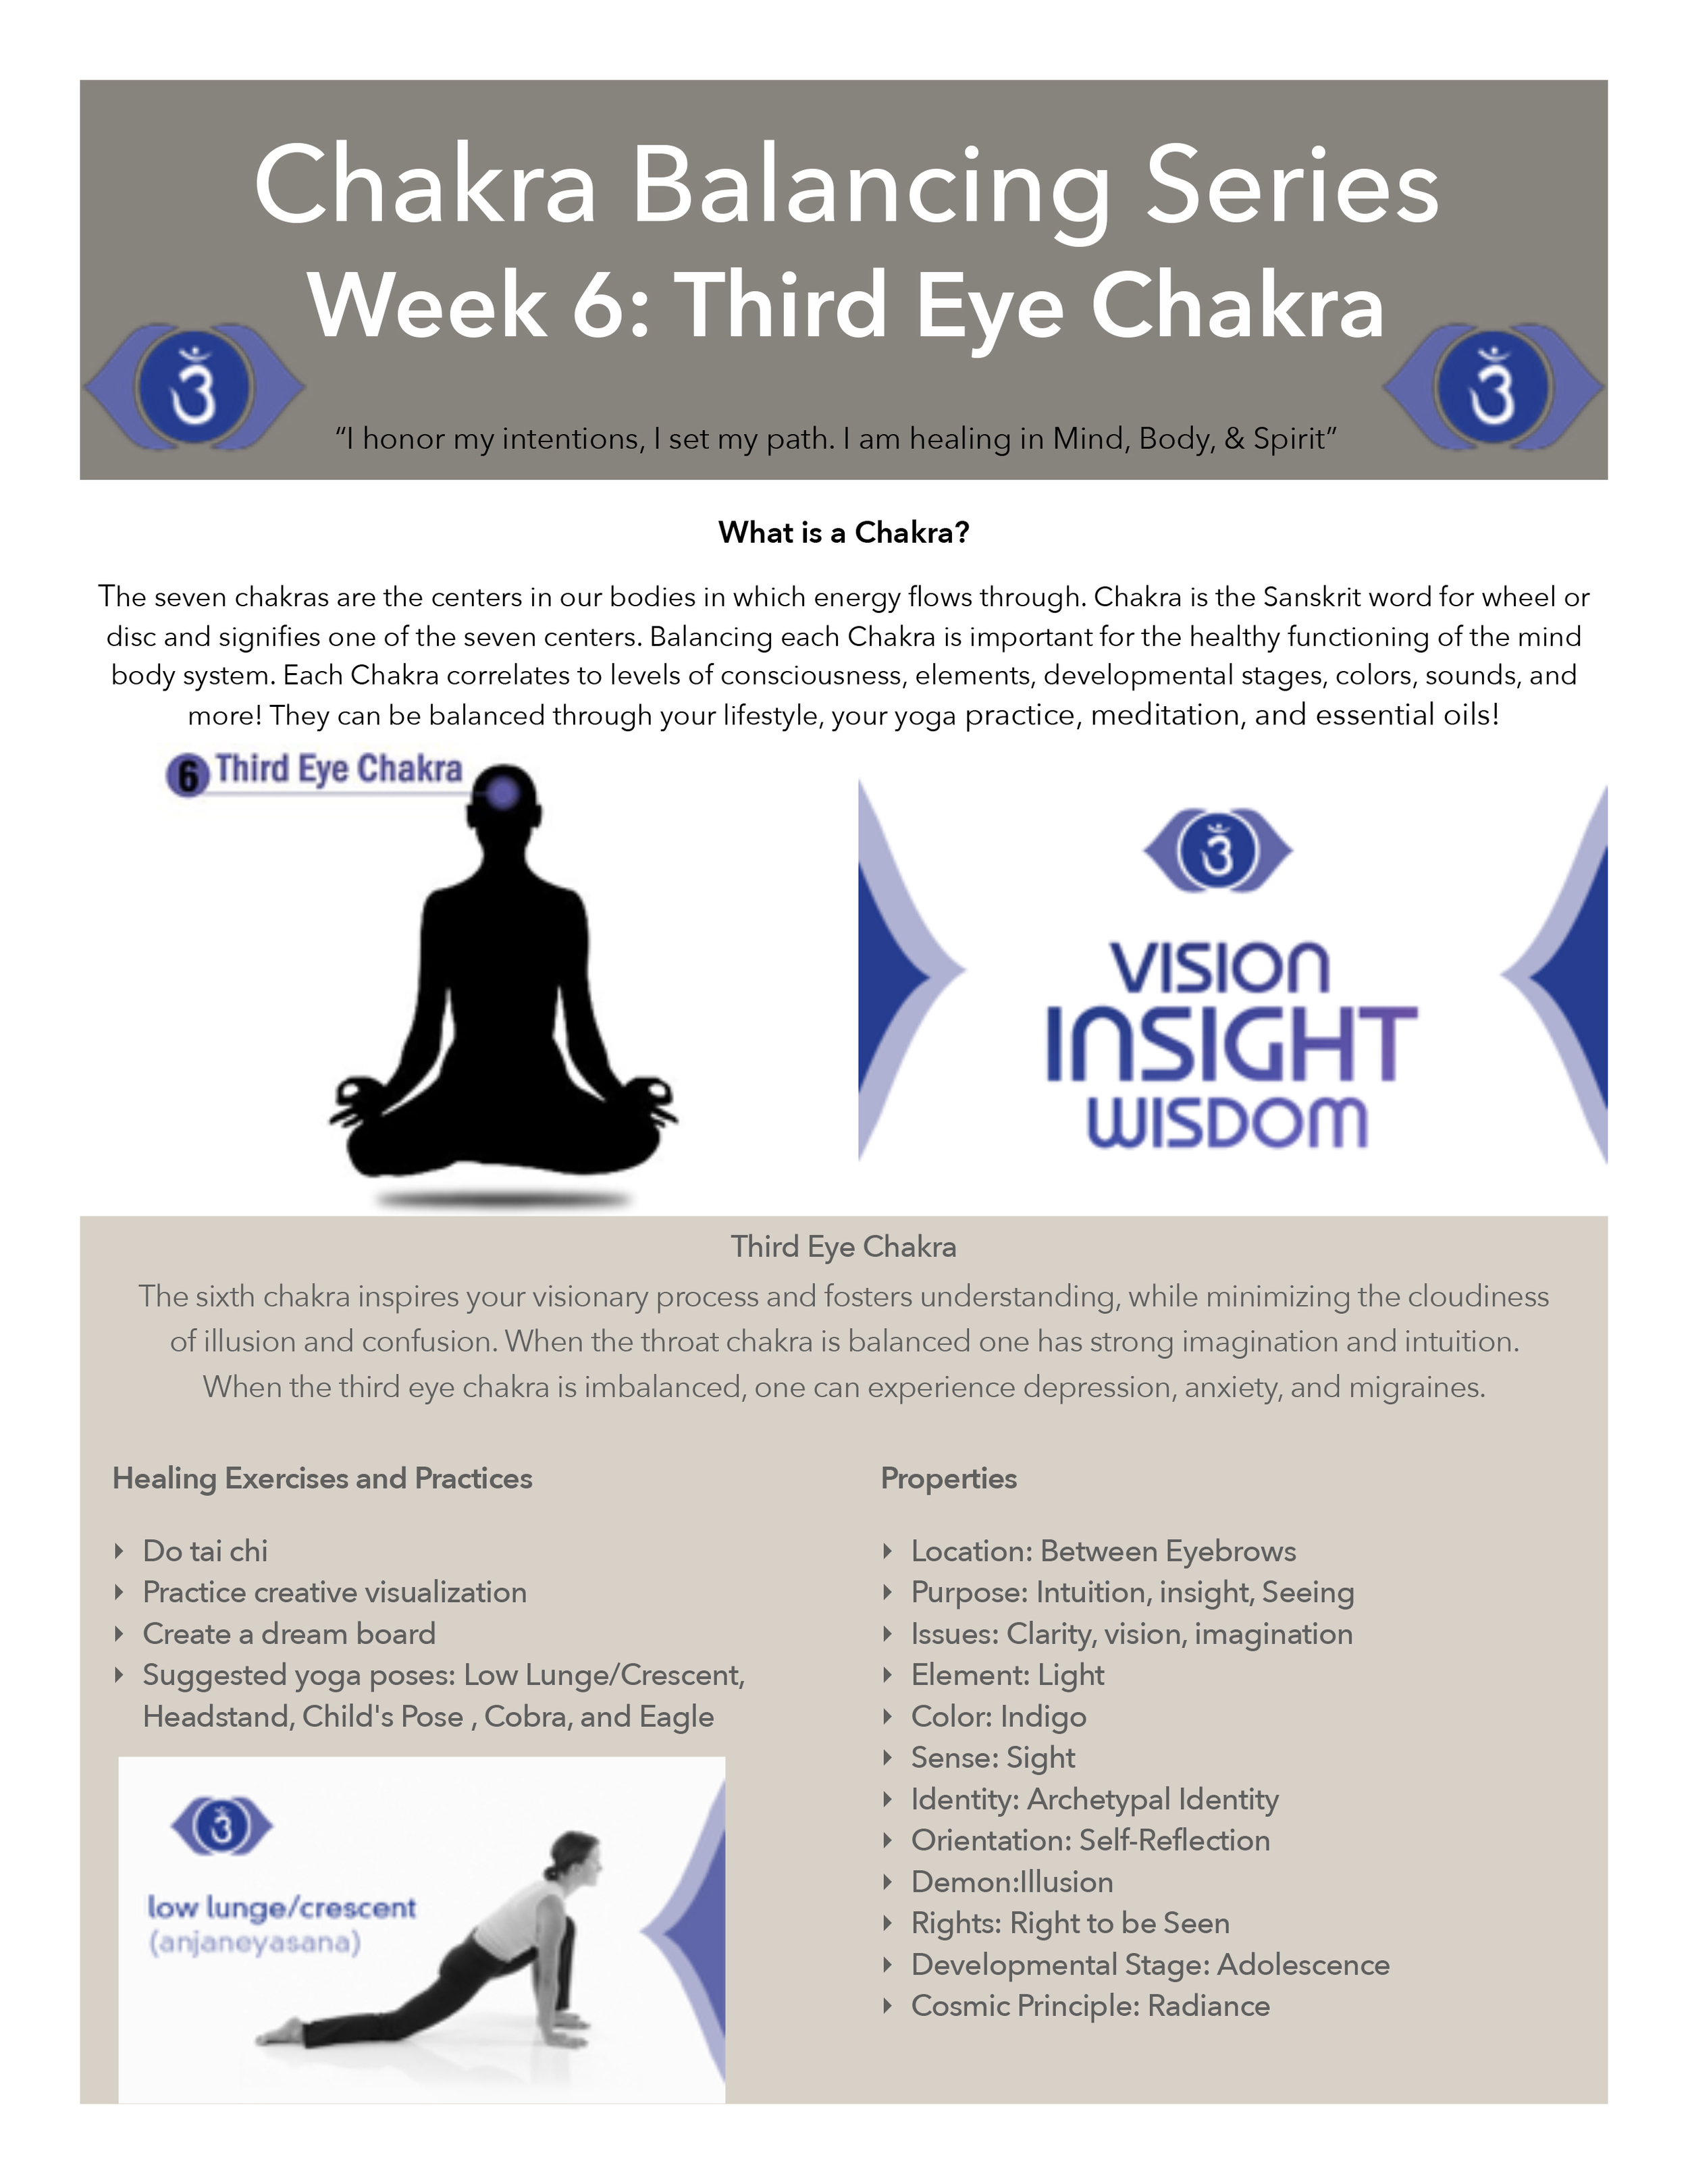 Third Eye Chakra - All You Need To Know | Kirsty Norton - Movement for  Modern Life Blog